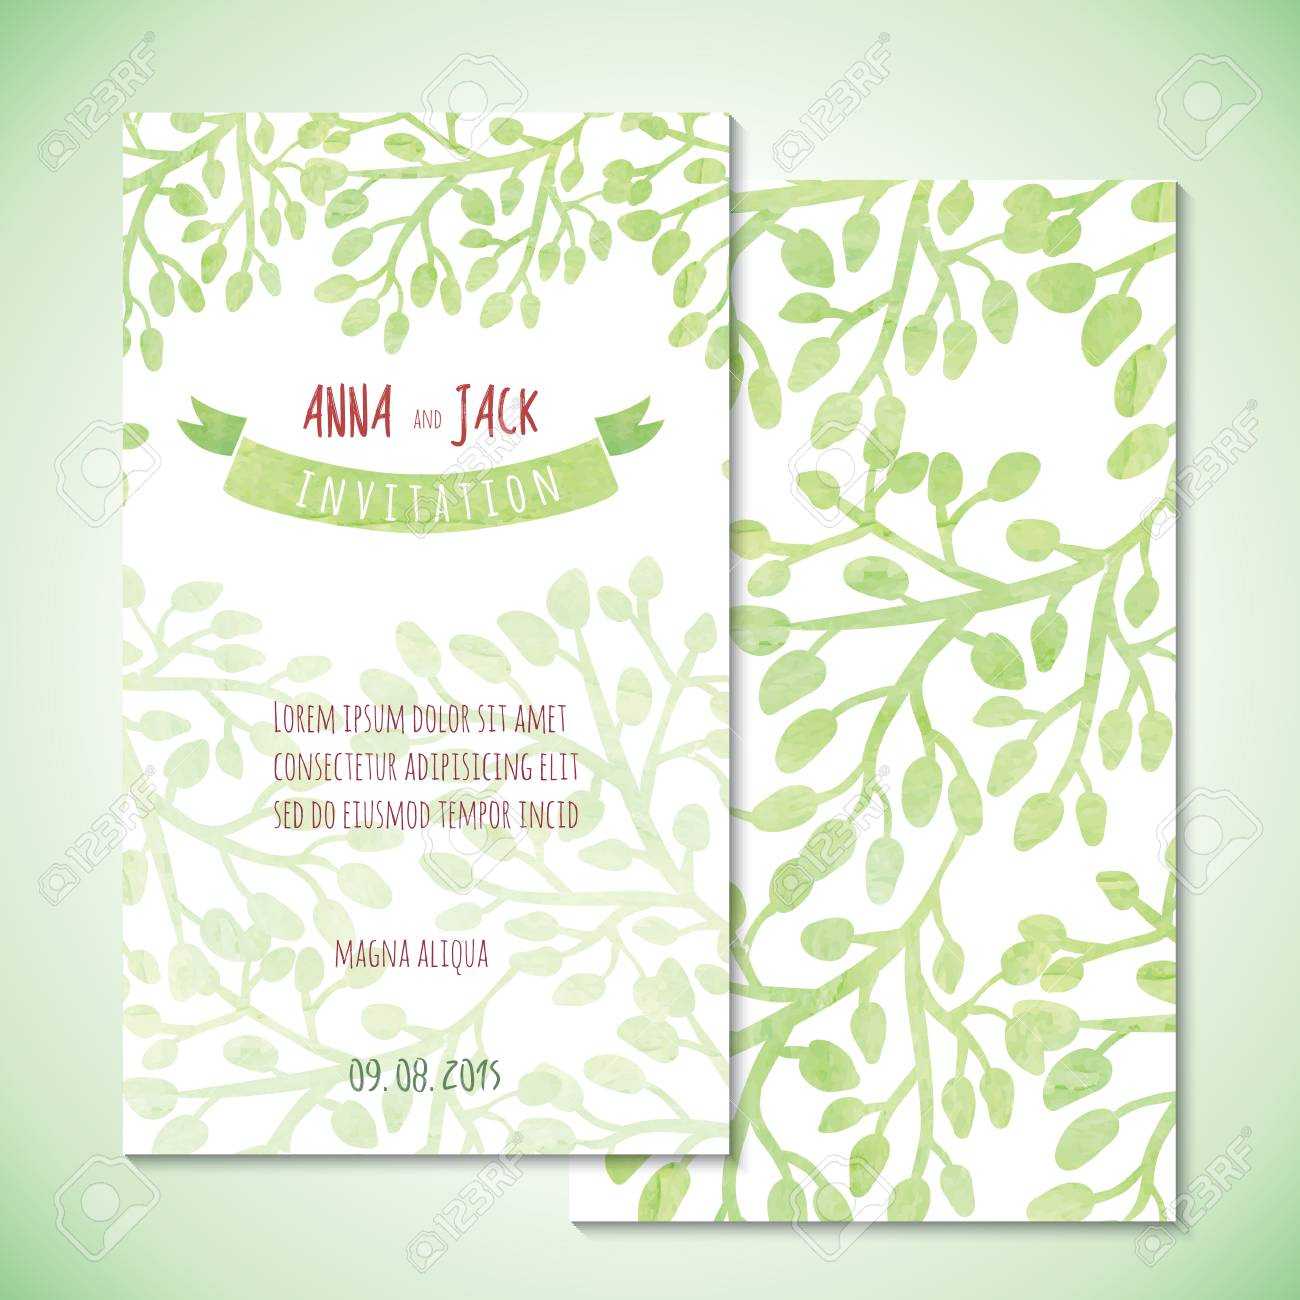 Watercolor Card Templates For Wedding Invitation, Save The Date.. With Save The Date Cards Templates